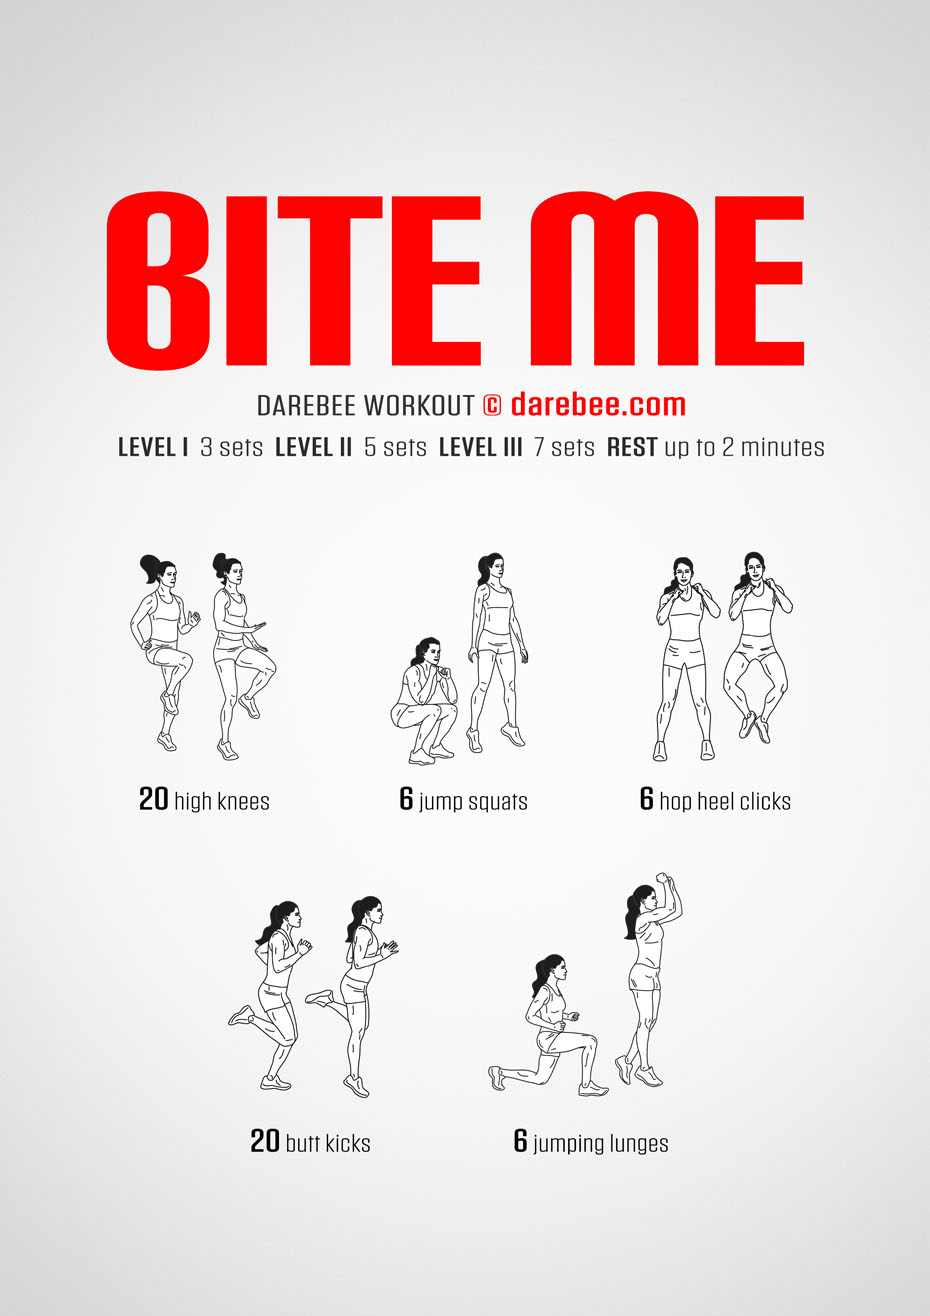 Bite Me is a sassy, fast-moving, high-burn, cardiovascular Darebee home-fitness workout that will test your VO2 Max and help you improve your recovery time.